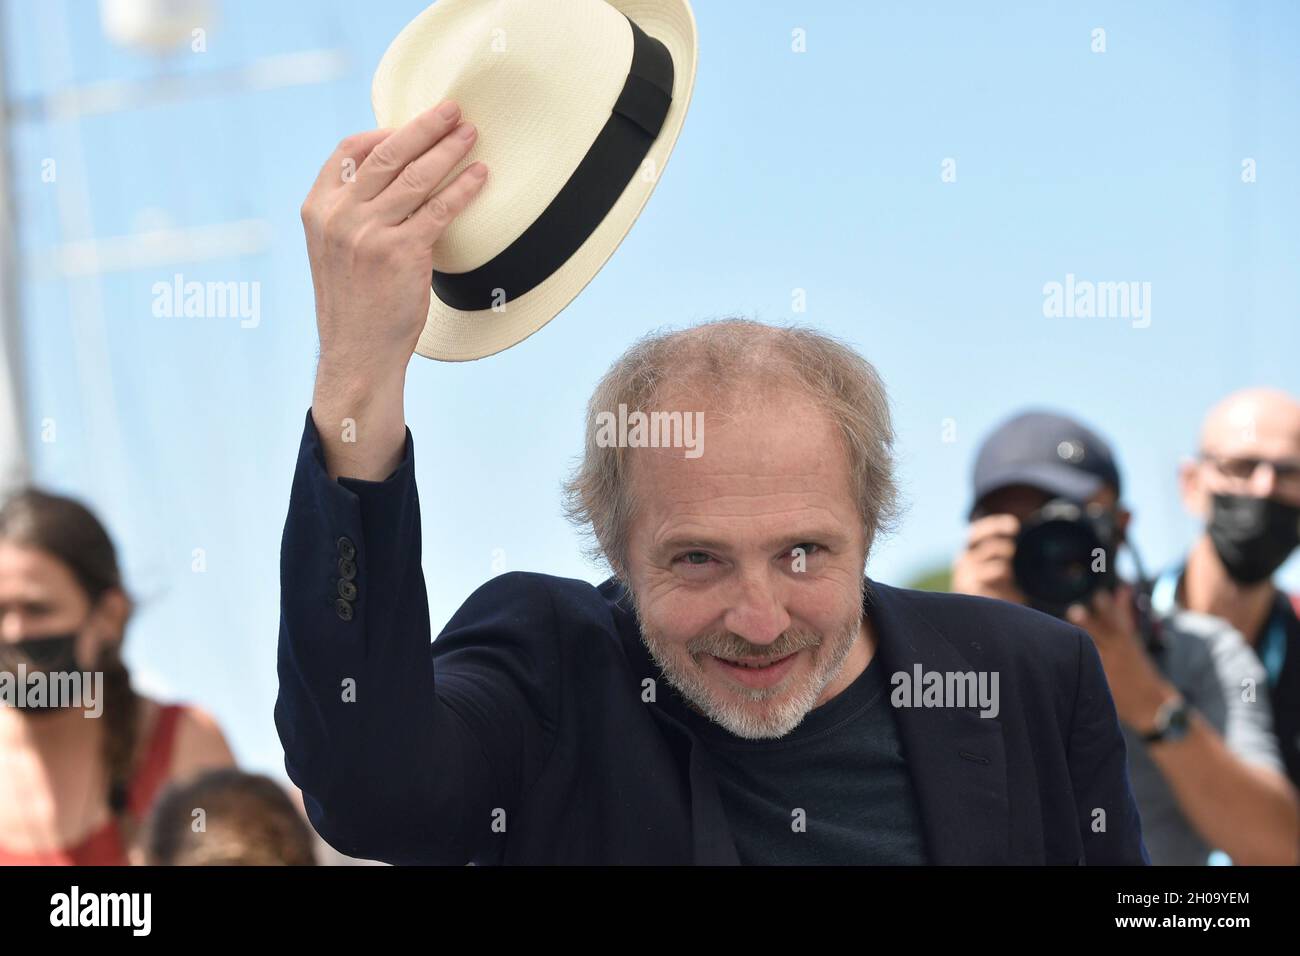 74th edition of the Cannes Film Festival: director Arnaud Desplechin posing during a photocall for the film “Deception” (French “Tromperie”), on July Stock Photo